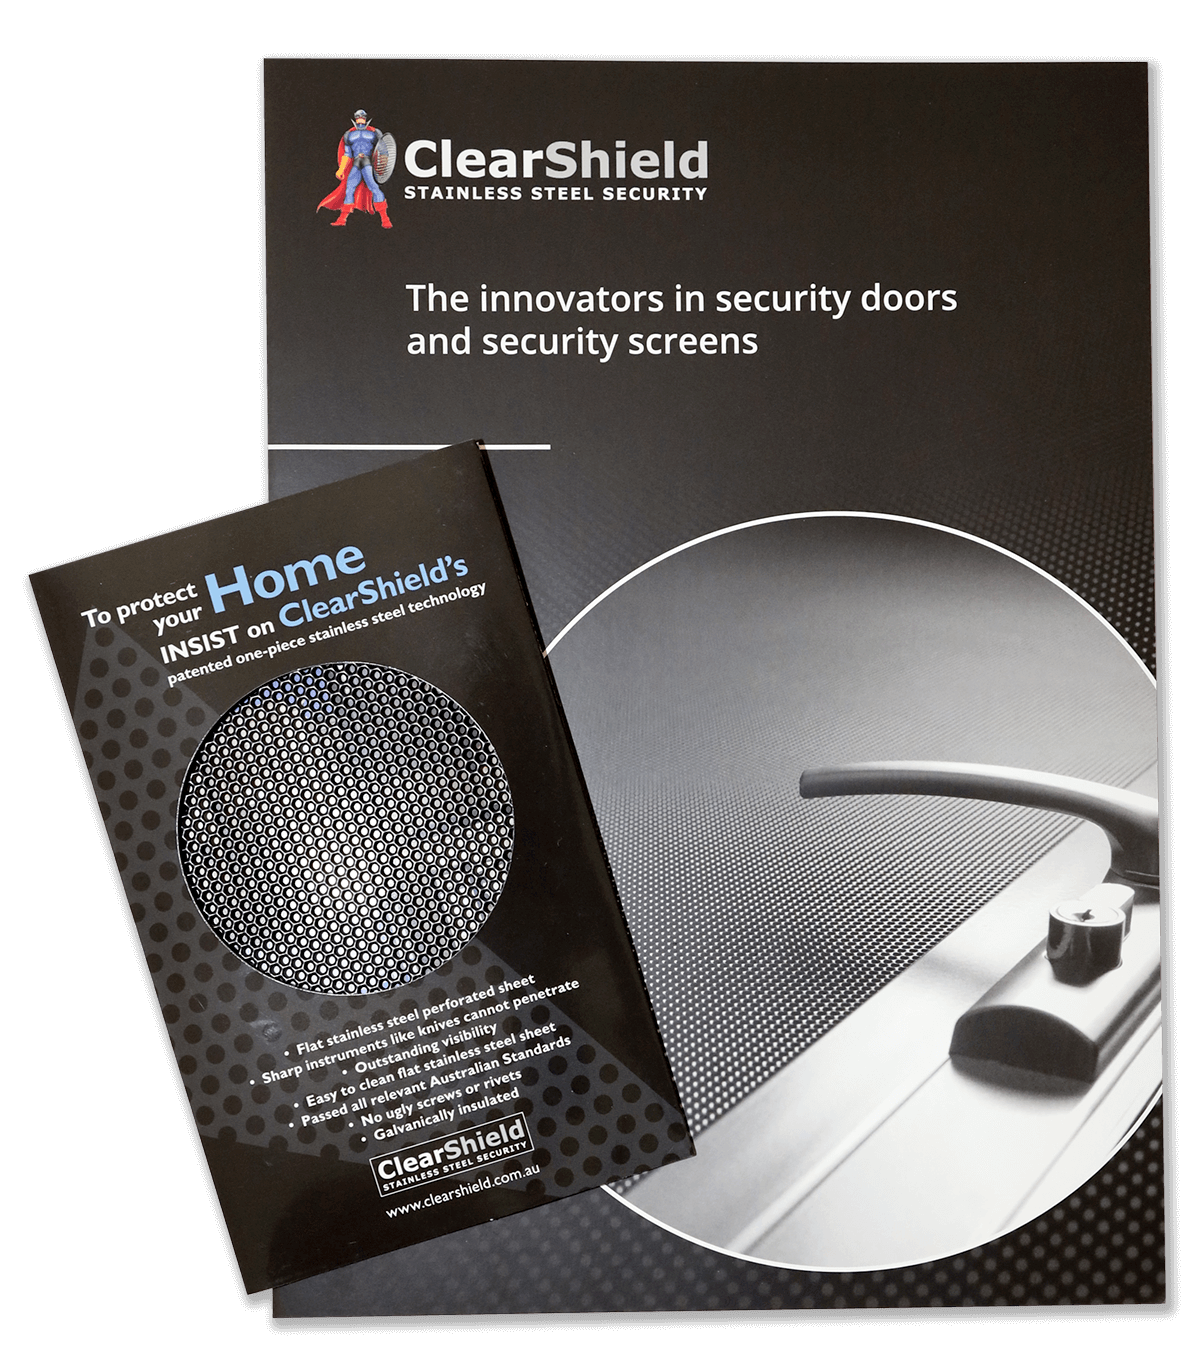 ClearShield Brochures